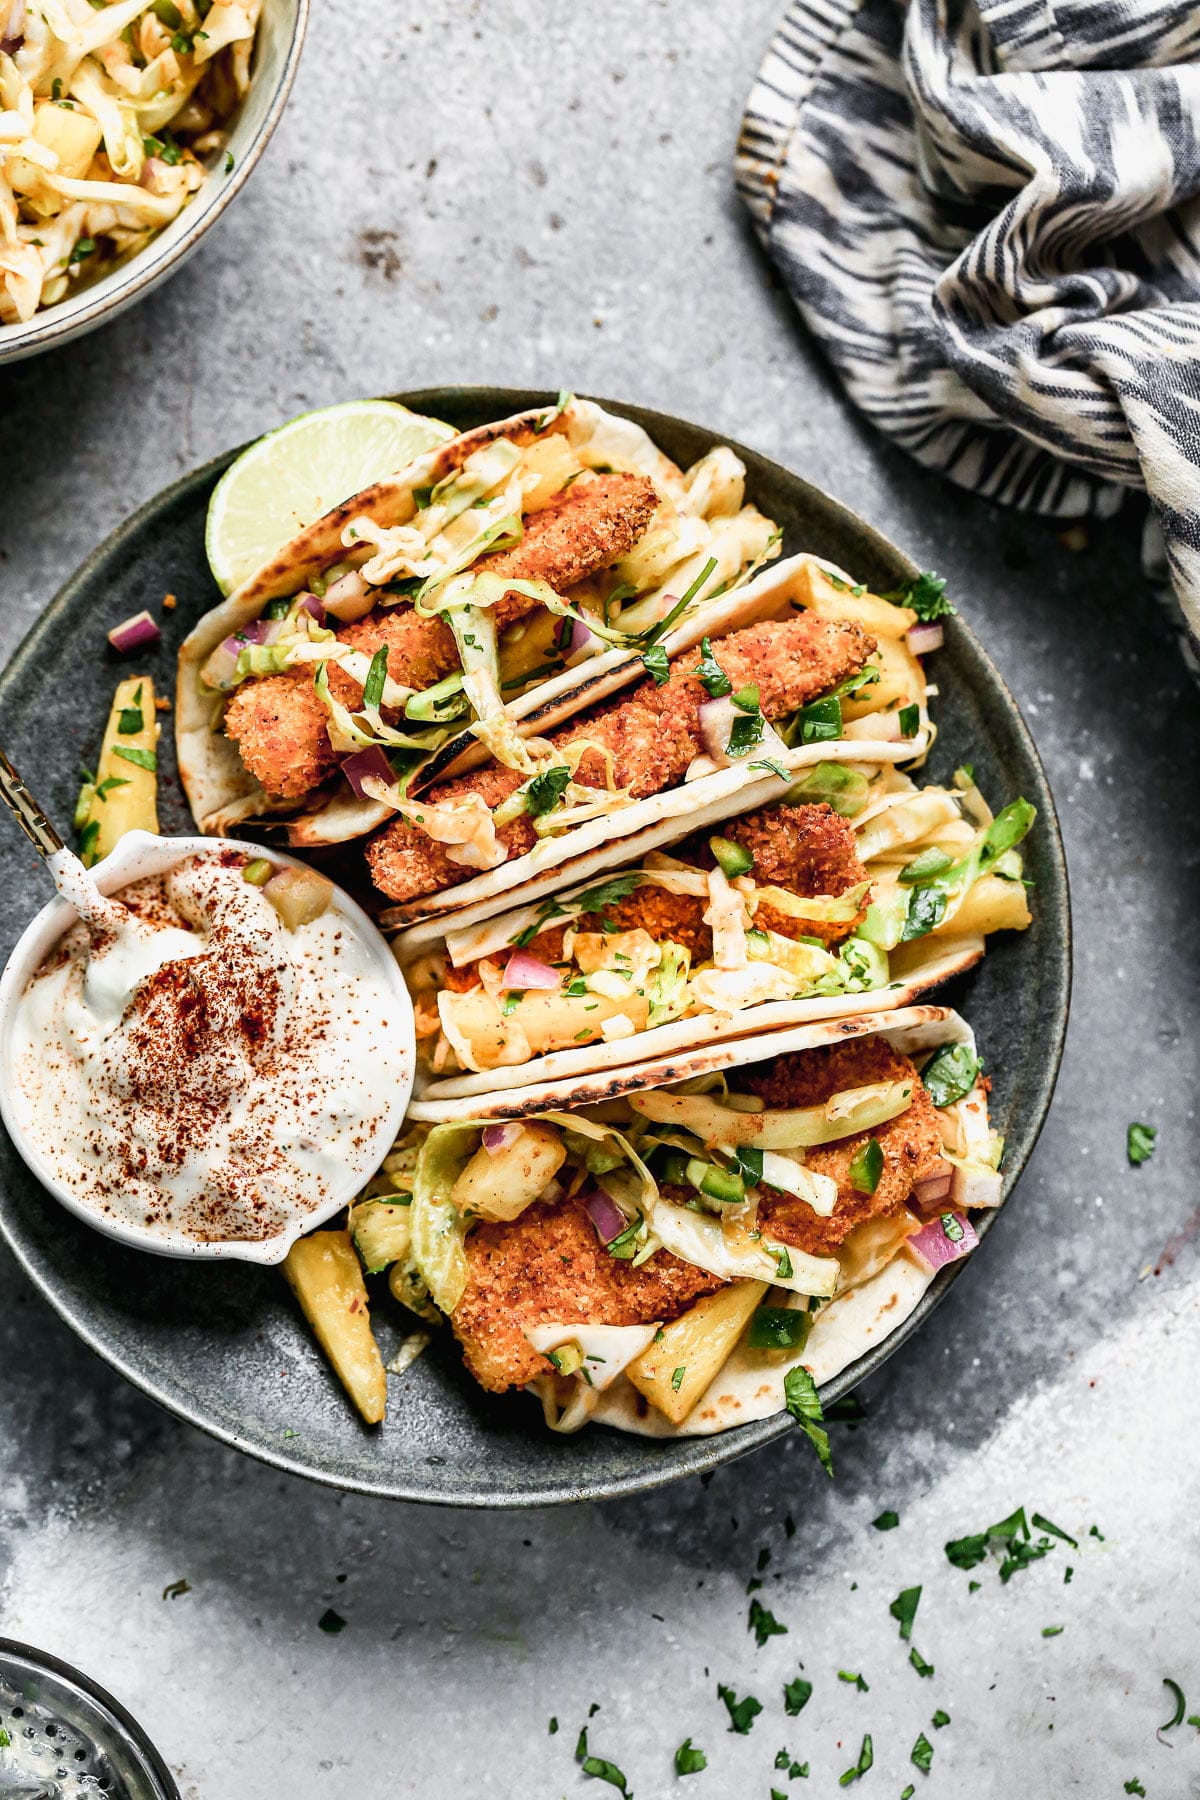 Never have a soggy fish taco again! Our Air Fryer Fish Tacos produce the CRISPIEST breaded fish without all the fat and calories and WITH all the flavor. We nestle the crunchy barramundi in charred street taco tortillas, top with a quick pineapple slaw, and a fresh squeeze of lime juice. 